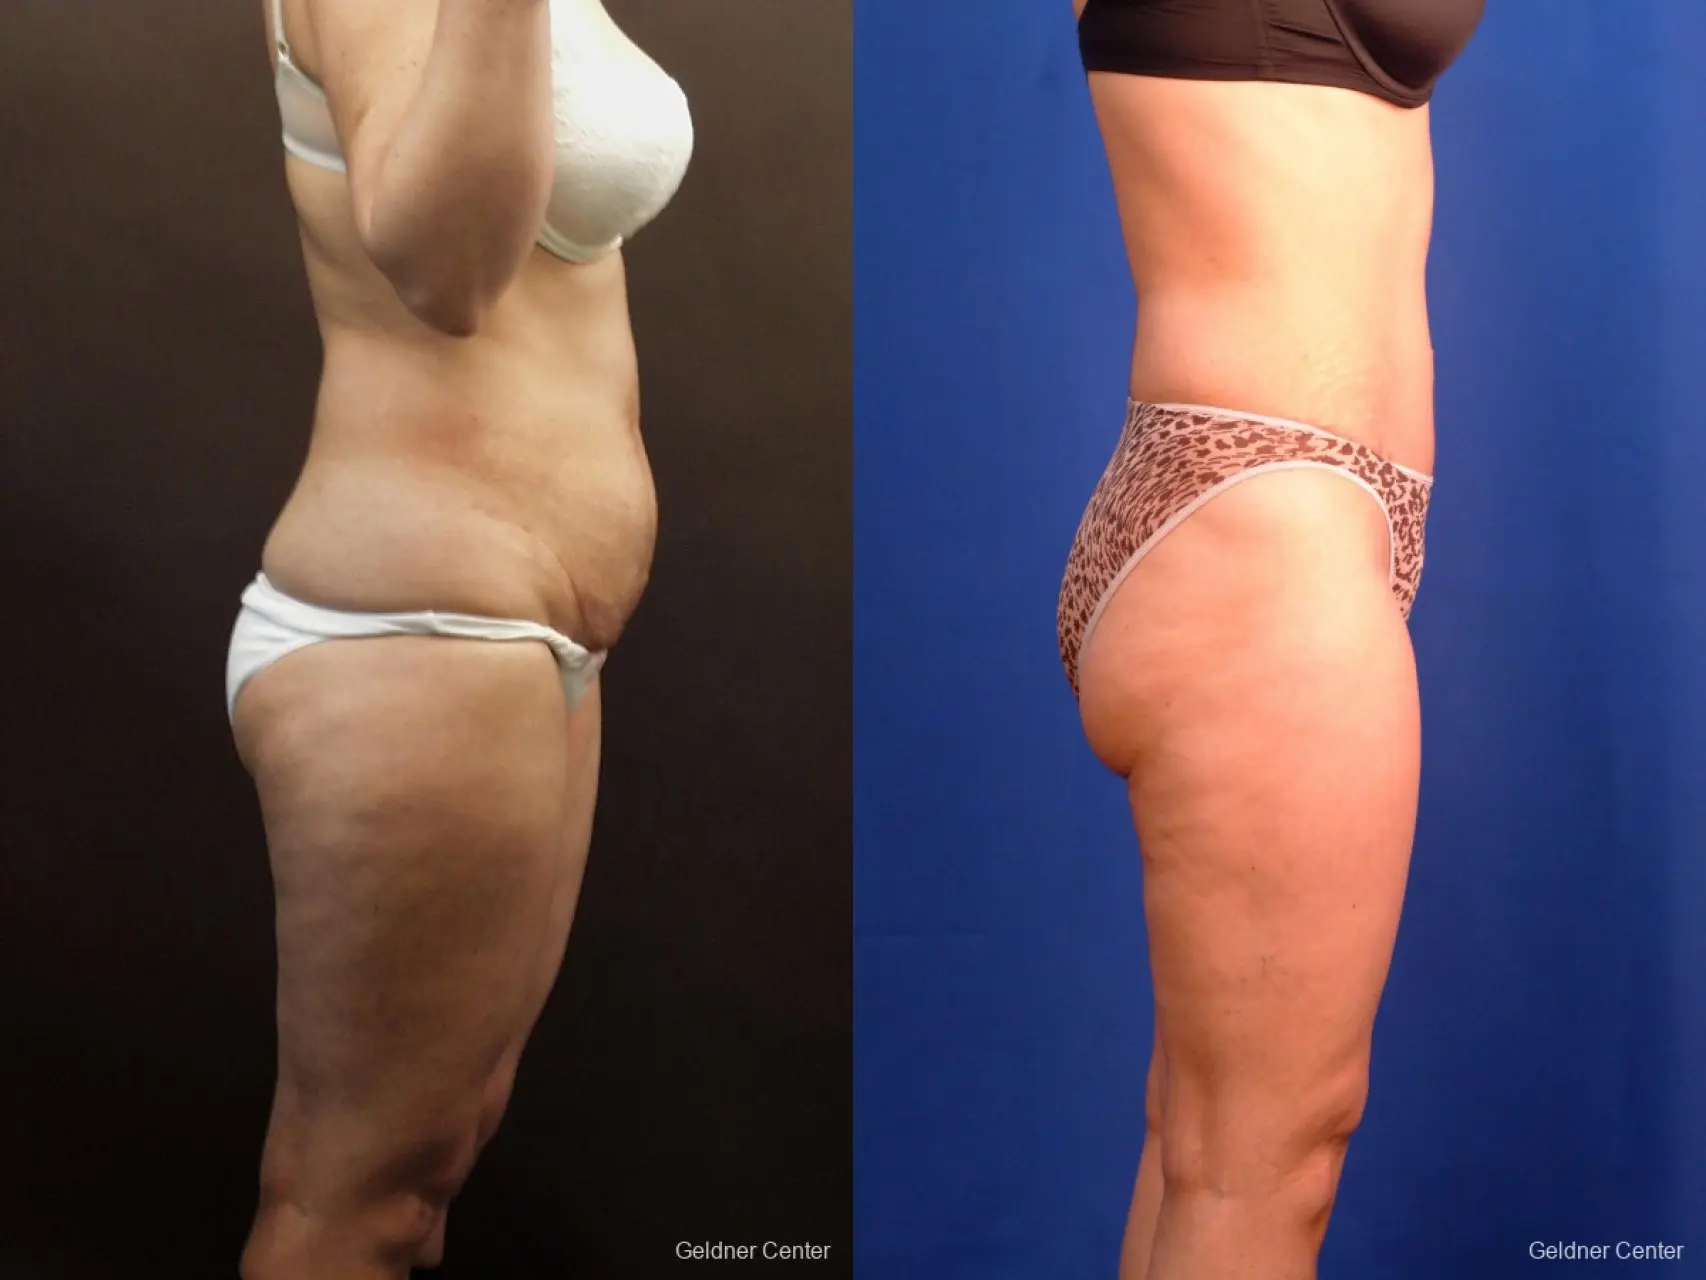 Liposuction: Patient 9 - Before and After 3